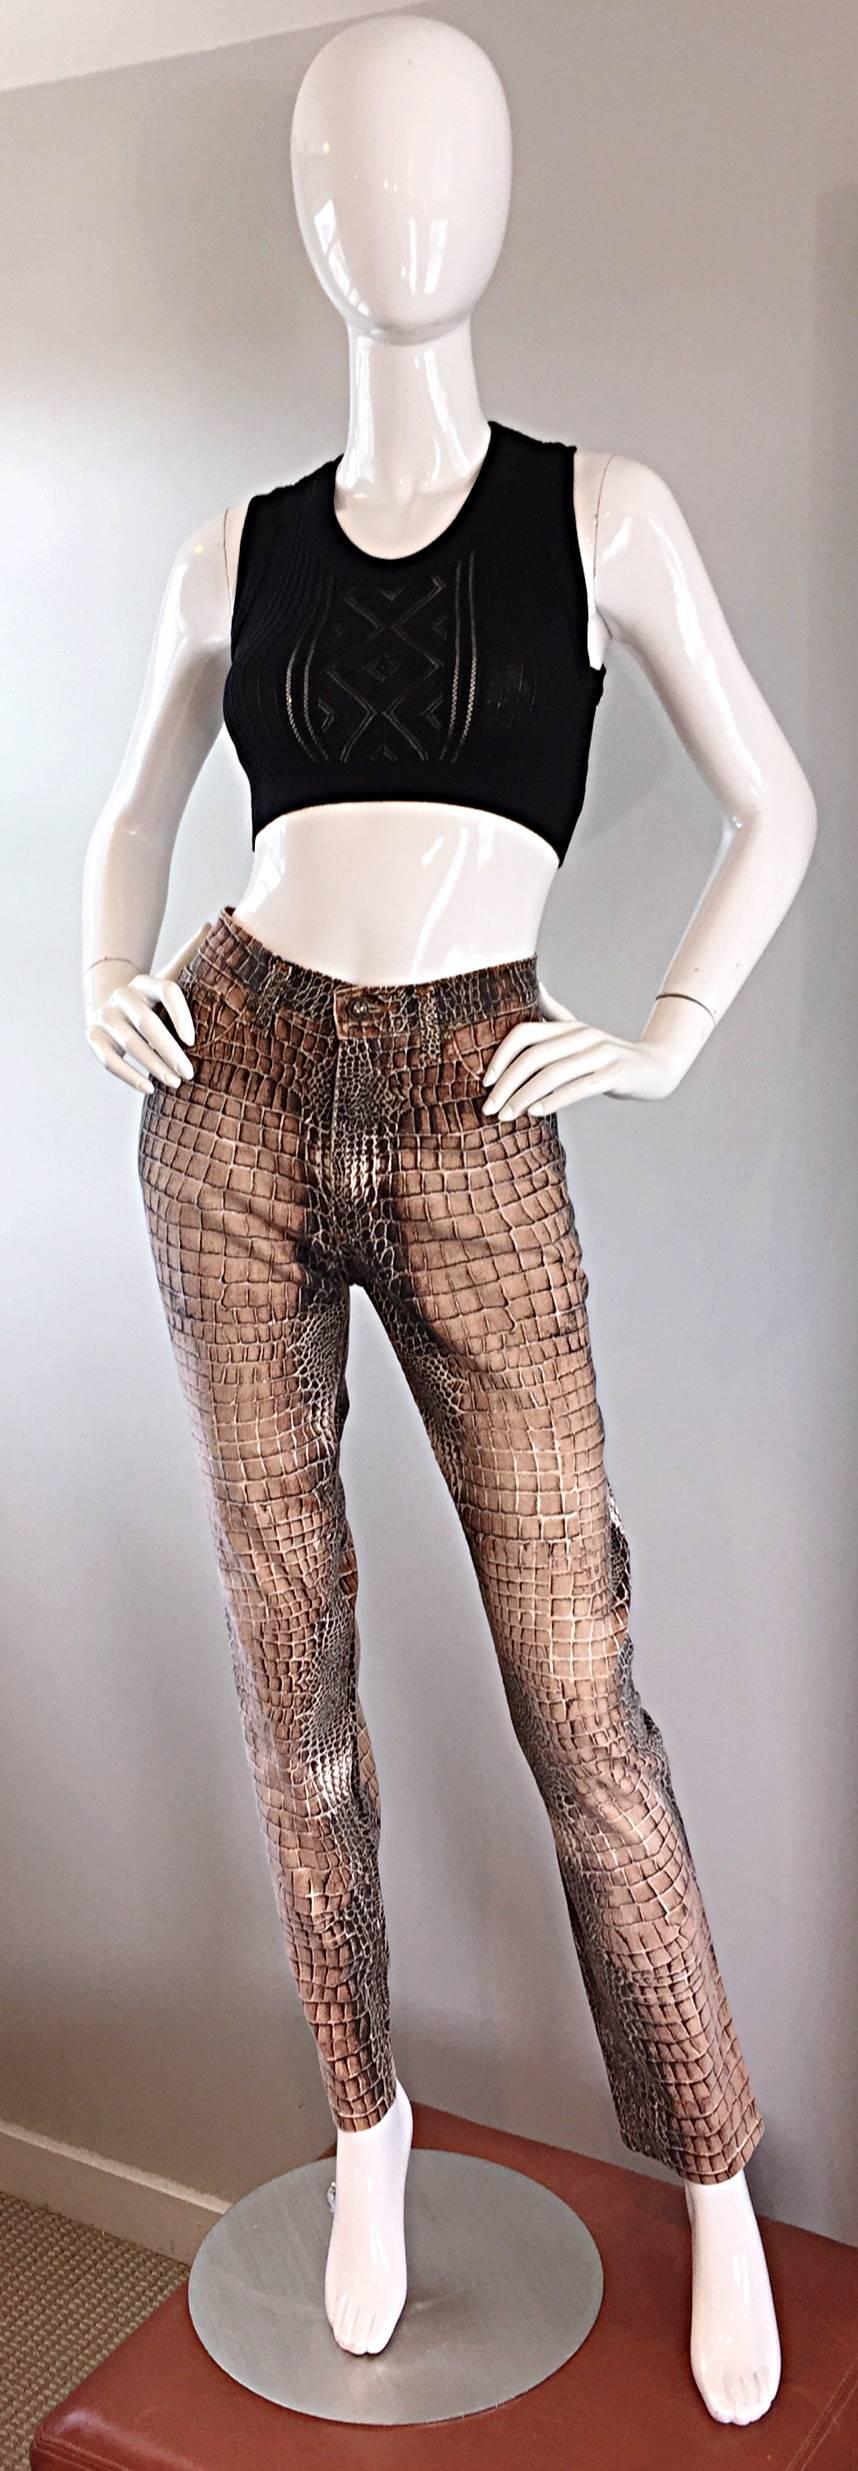 Knock em' dead in these rare early 90s ROBERTO CAVALLI crocodile/alligator printed high waisted skinny trousers! Features an all over print, with a 3-D effect that is quite slimming. Flattering tailored fit, that is especially flattering to the bum!